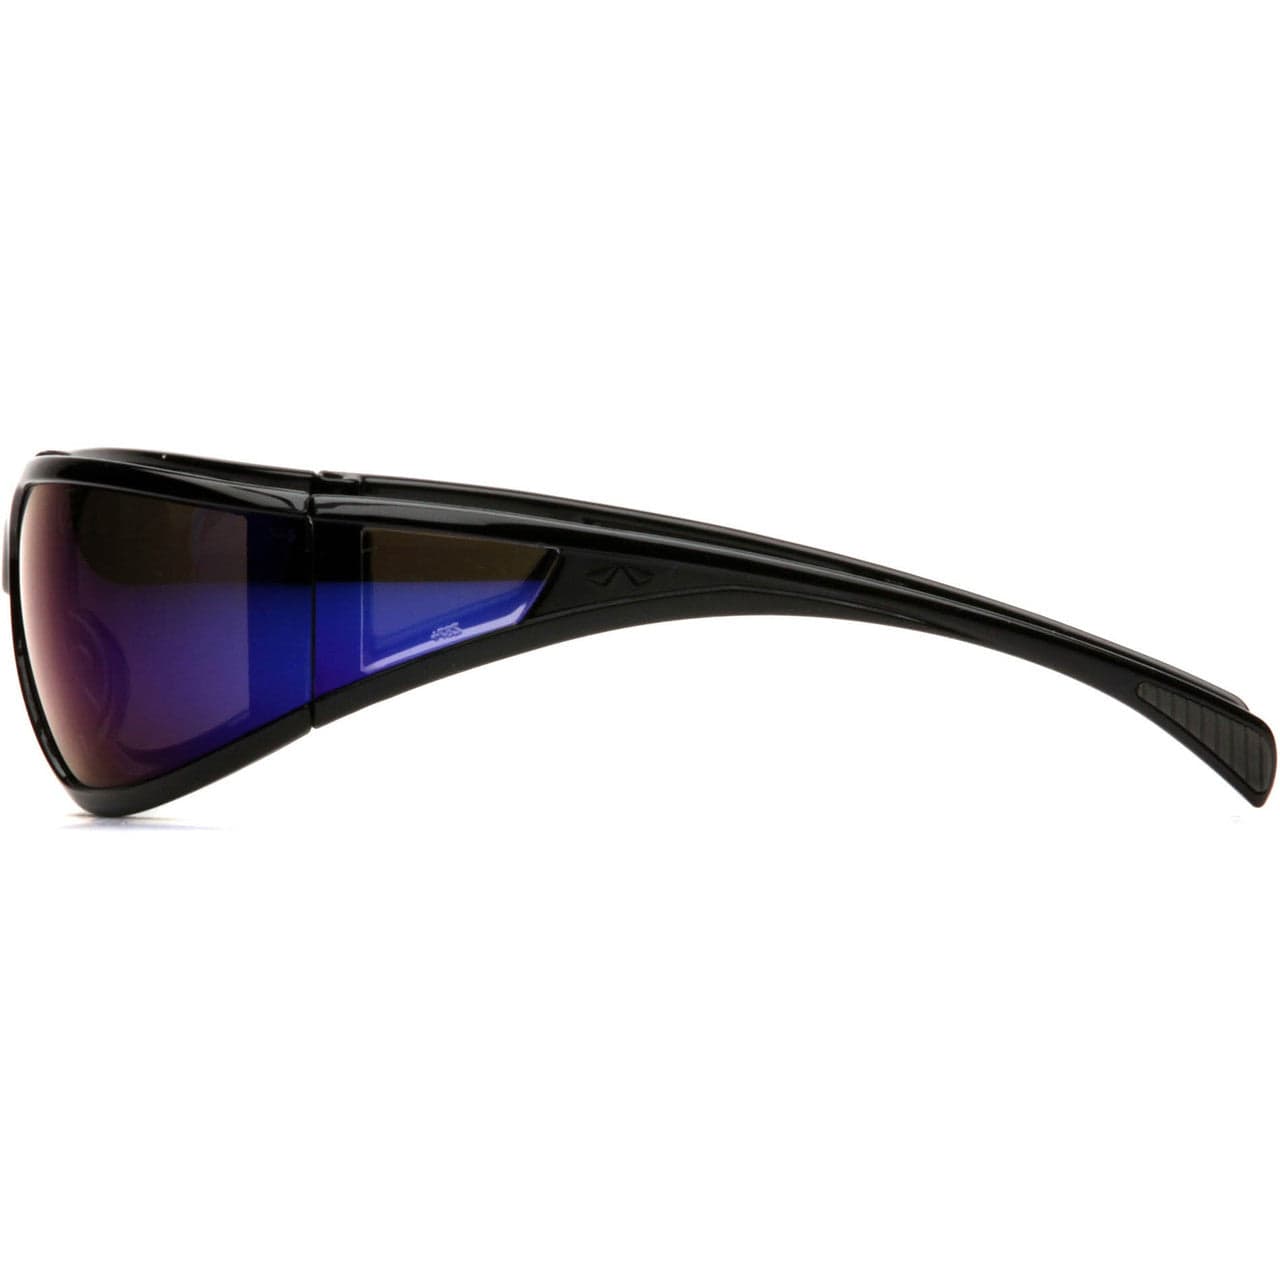 Pyramex Exeter Safety Glasses with Black Frame and Blue Mirror Anti-Fog Lens SB5175DT Side